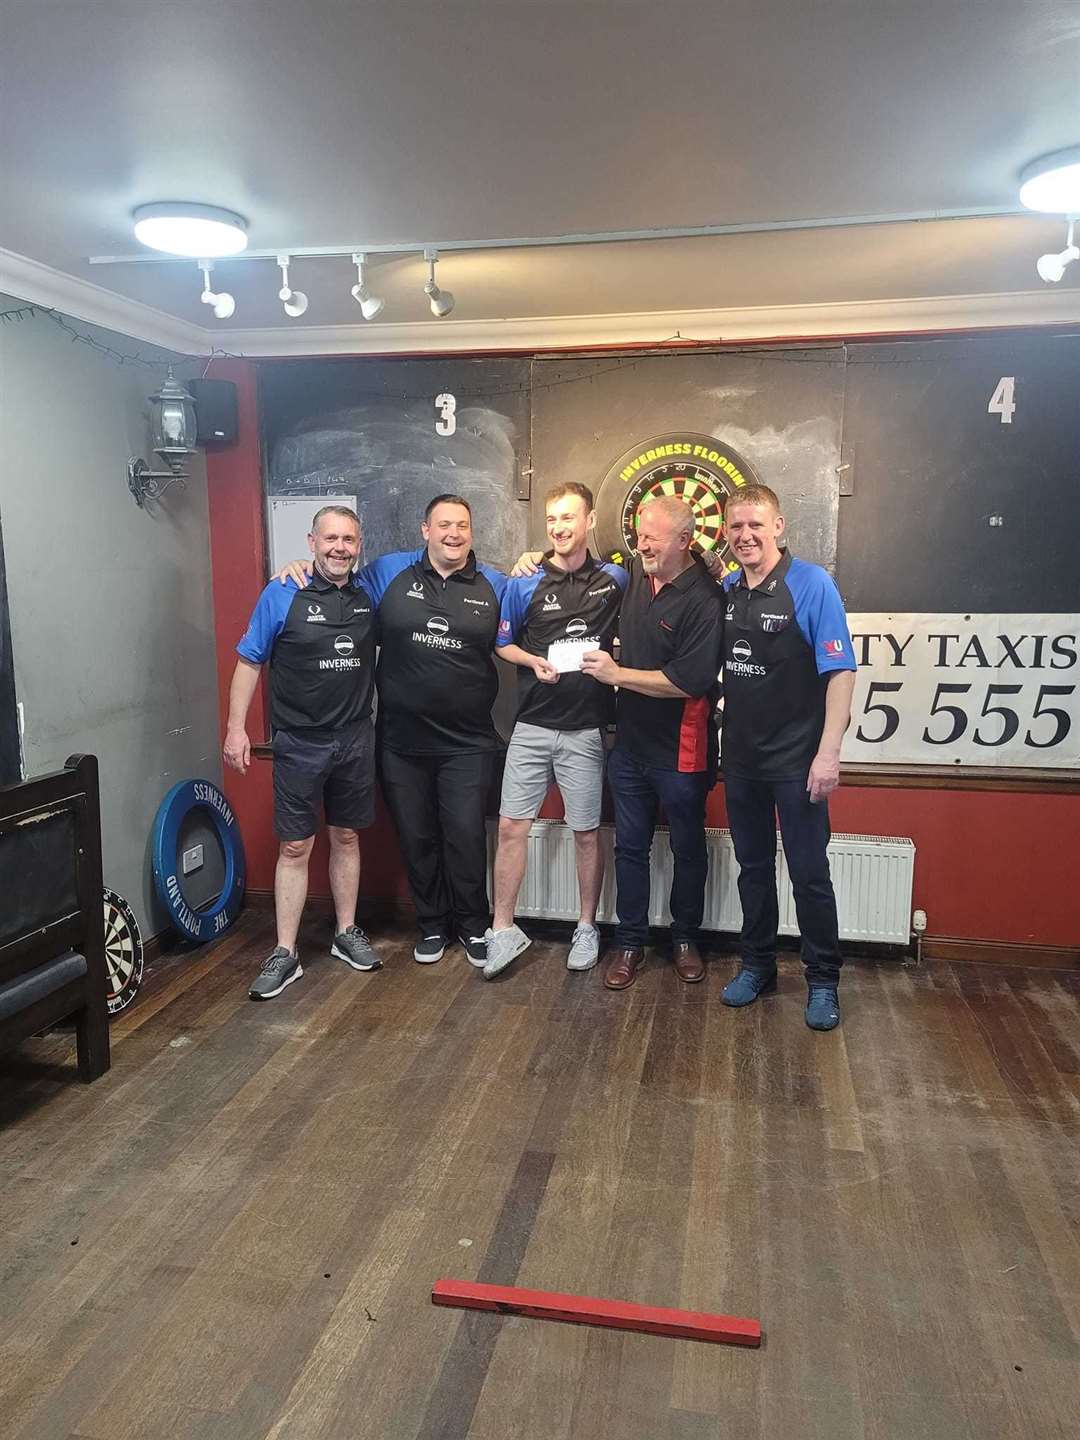 Coming through the fours field of 18 teams at the Portland Festival of Darts to win were The Portland A1 team of James Fraser, Stevie Mitchell, Chris Wood and Lewis MacKenzie.